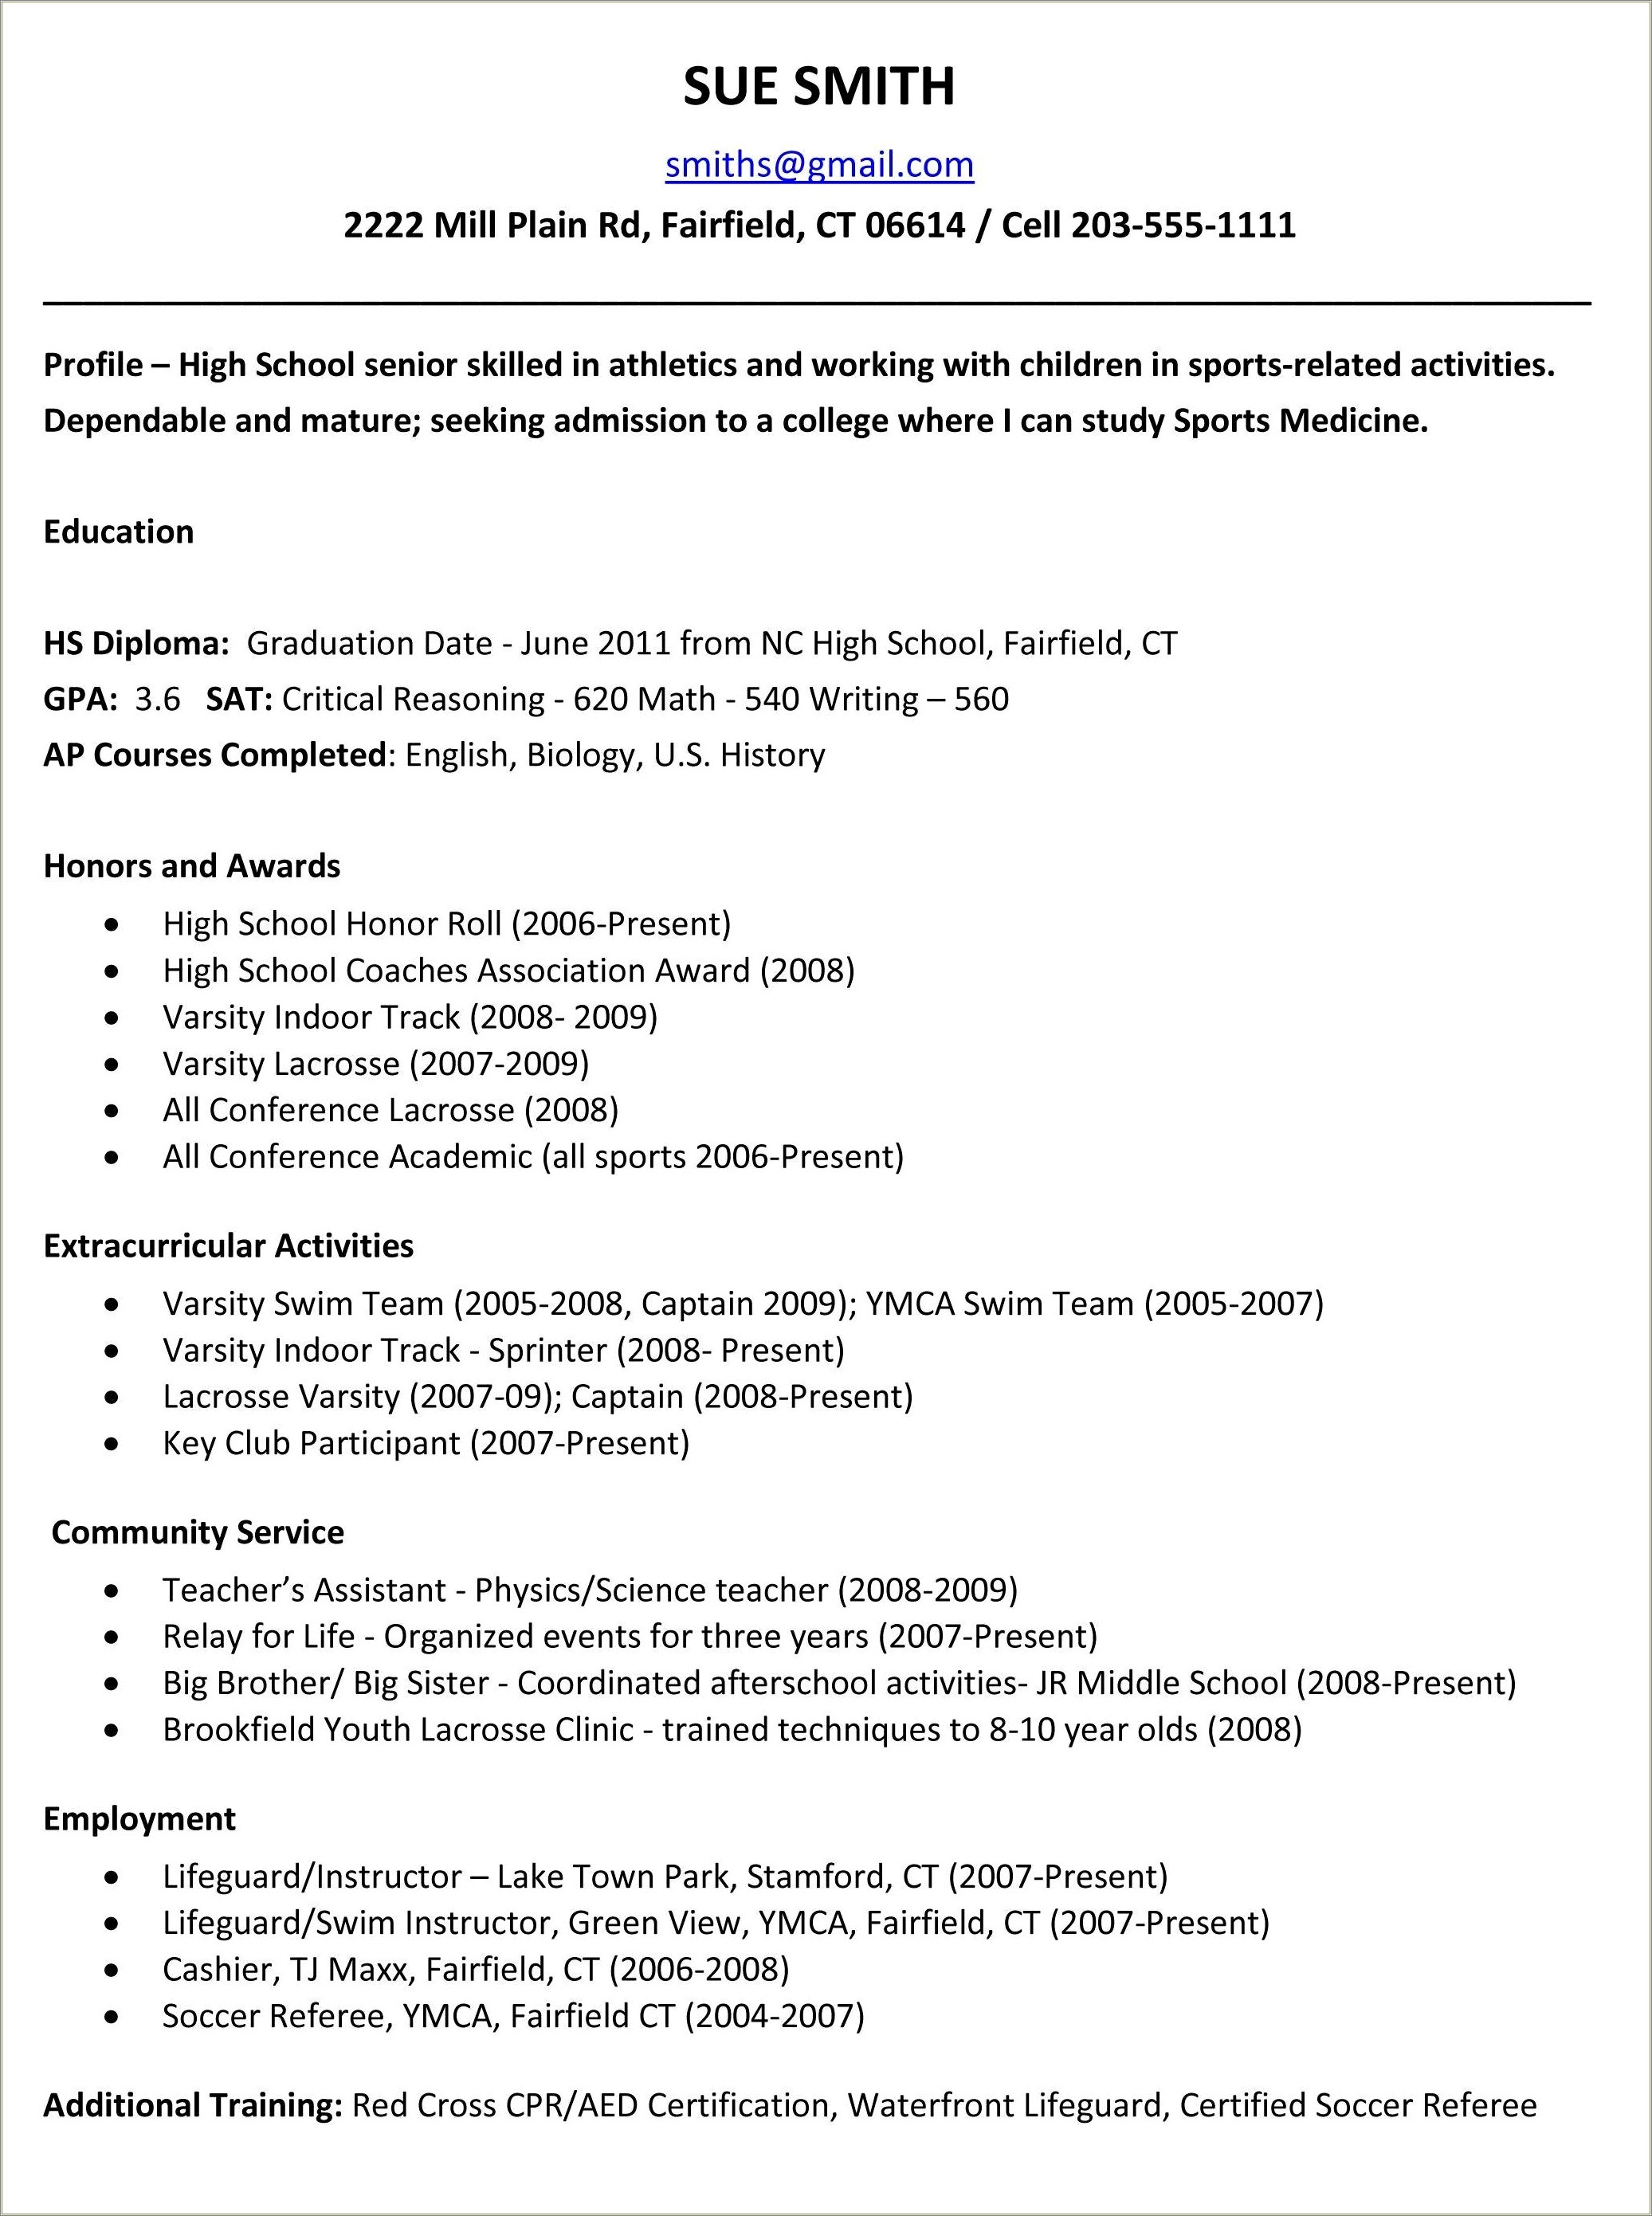 Samples Of Extracurricular Activities In Resume